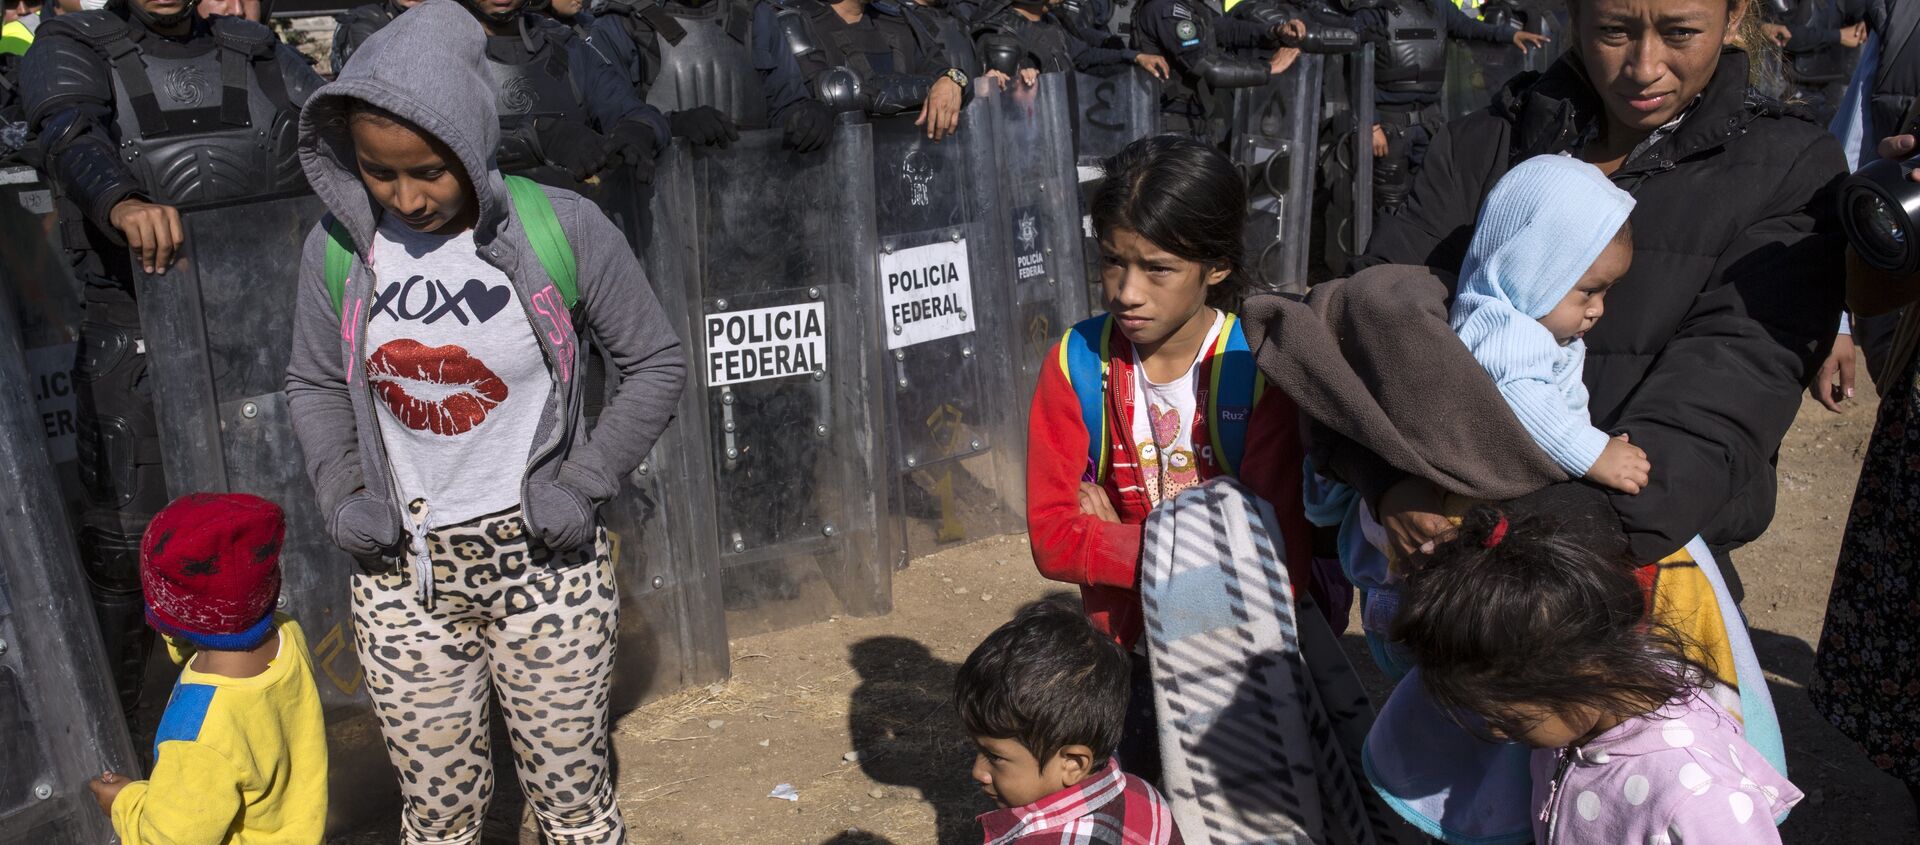 Migrants stand near Mexican police at the Mexico-U.S. border in Tijuana, Mexico, Sunday, Nov. 25, 2018, as they try to reach the US. - Sputnik International, 1920, 11.08.2021